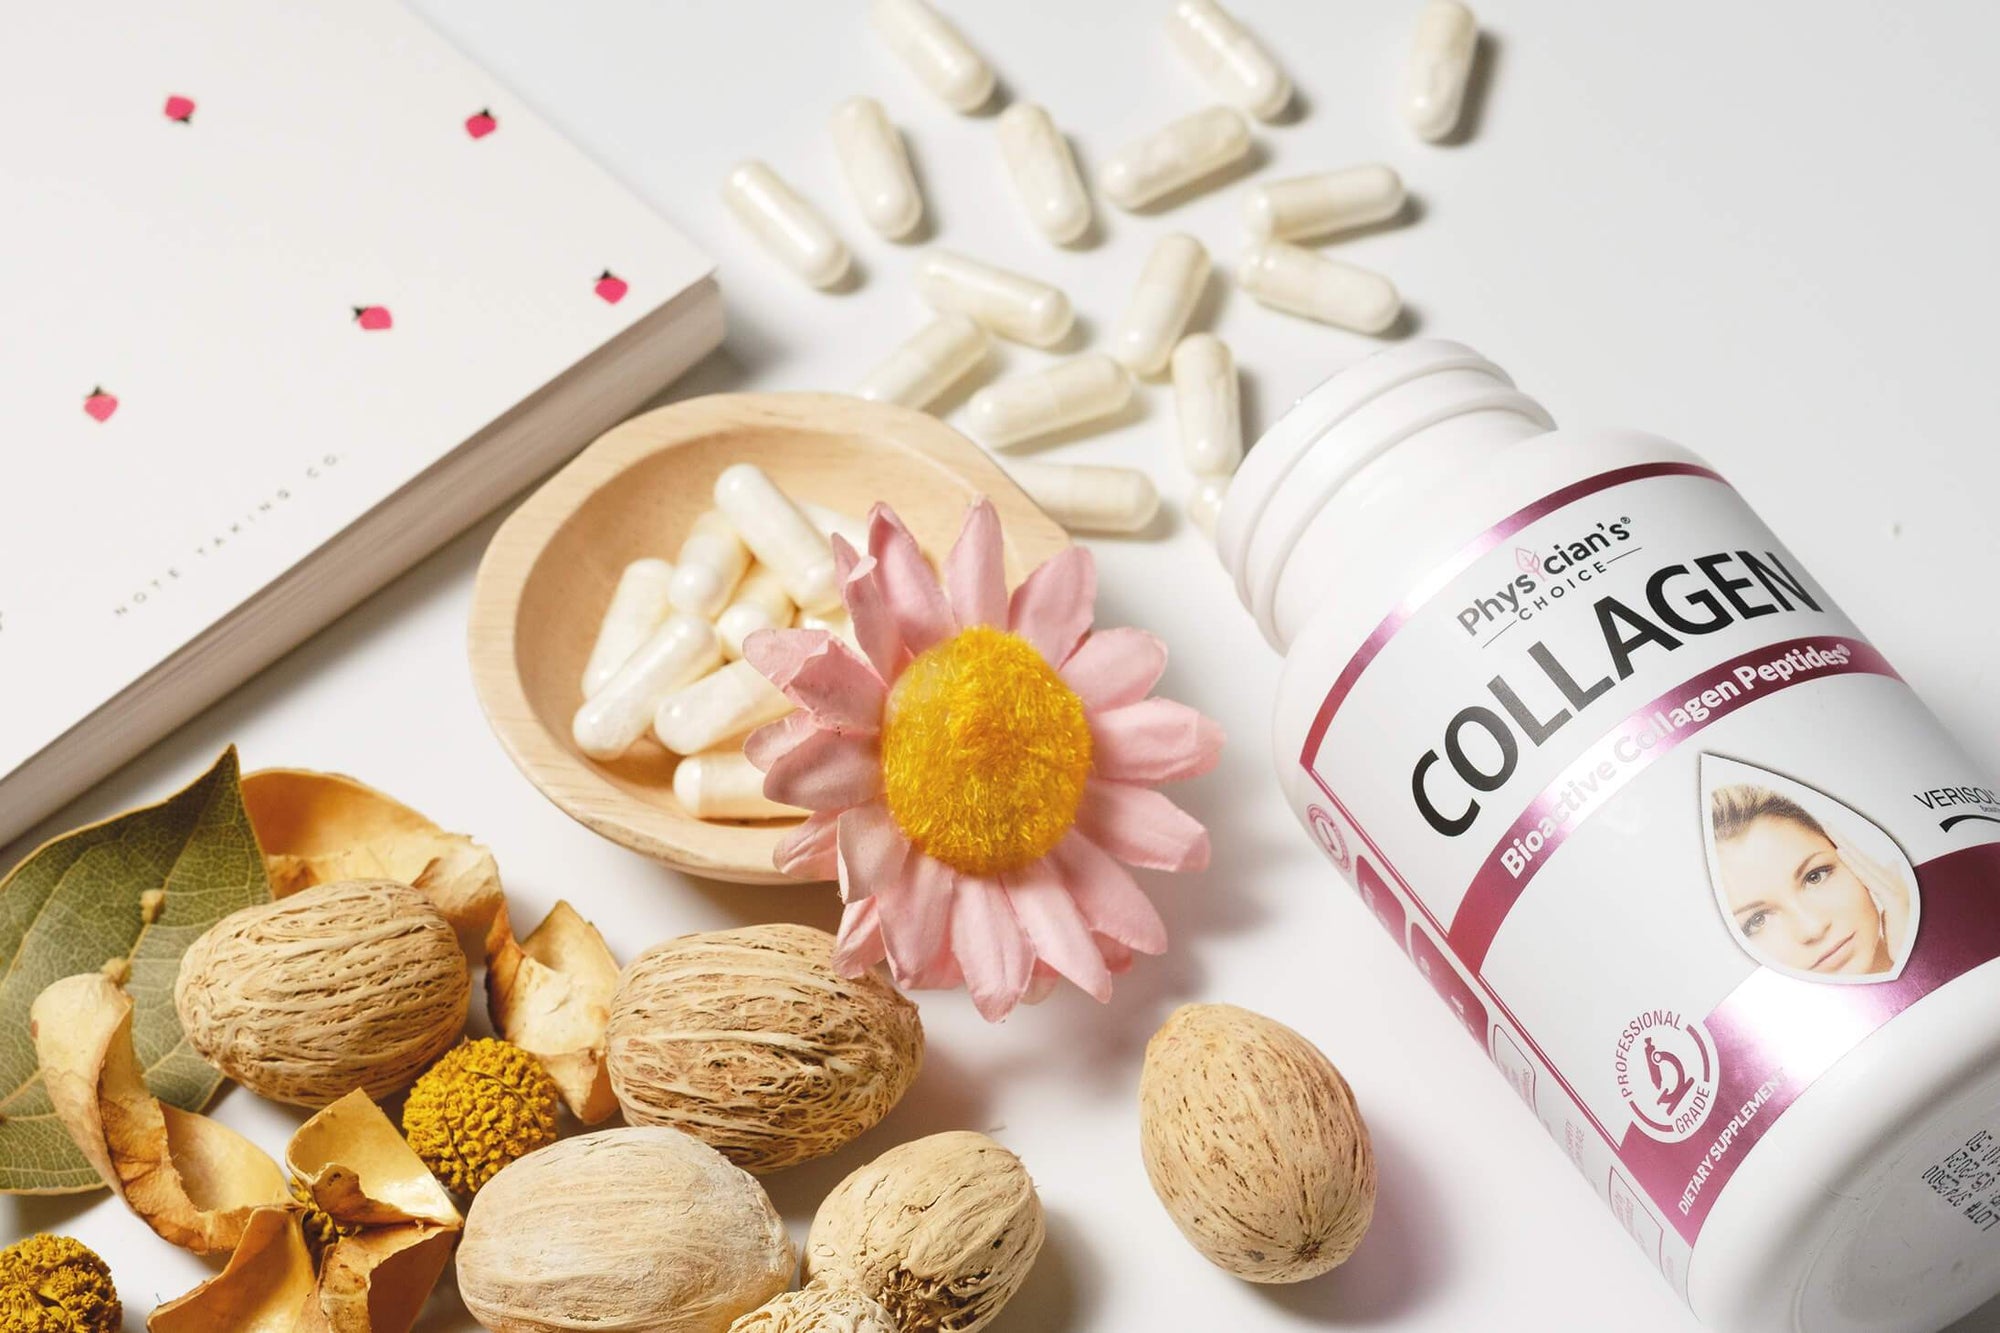 Physician's Choice collagen supplements next to flowers, nuts, and a notebook